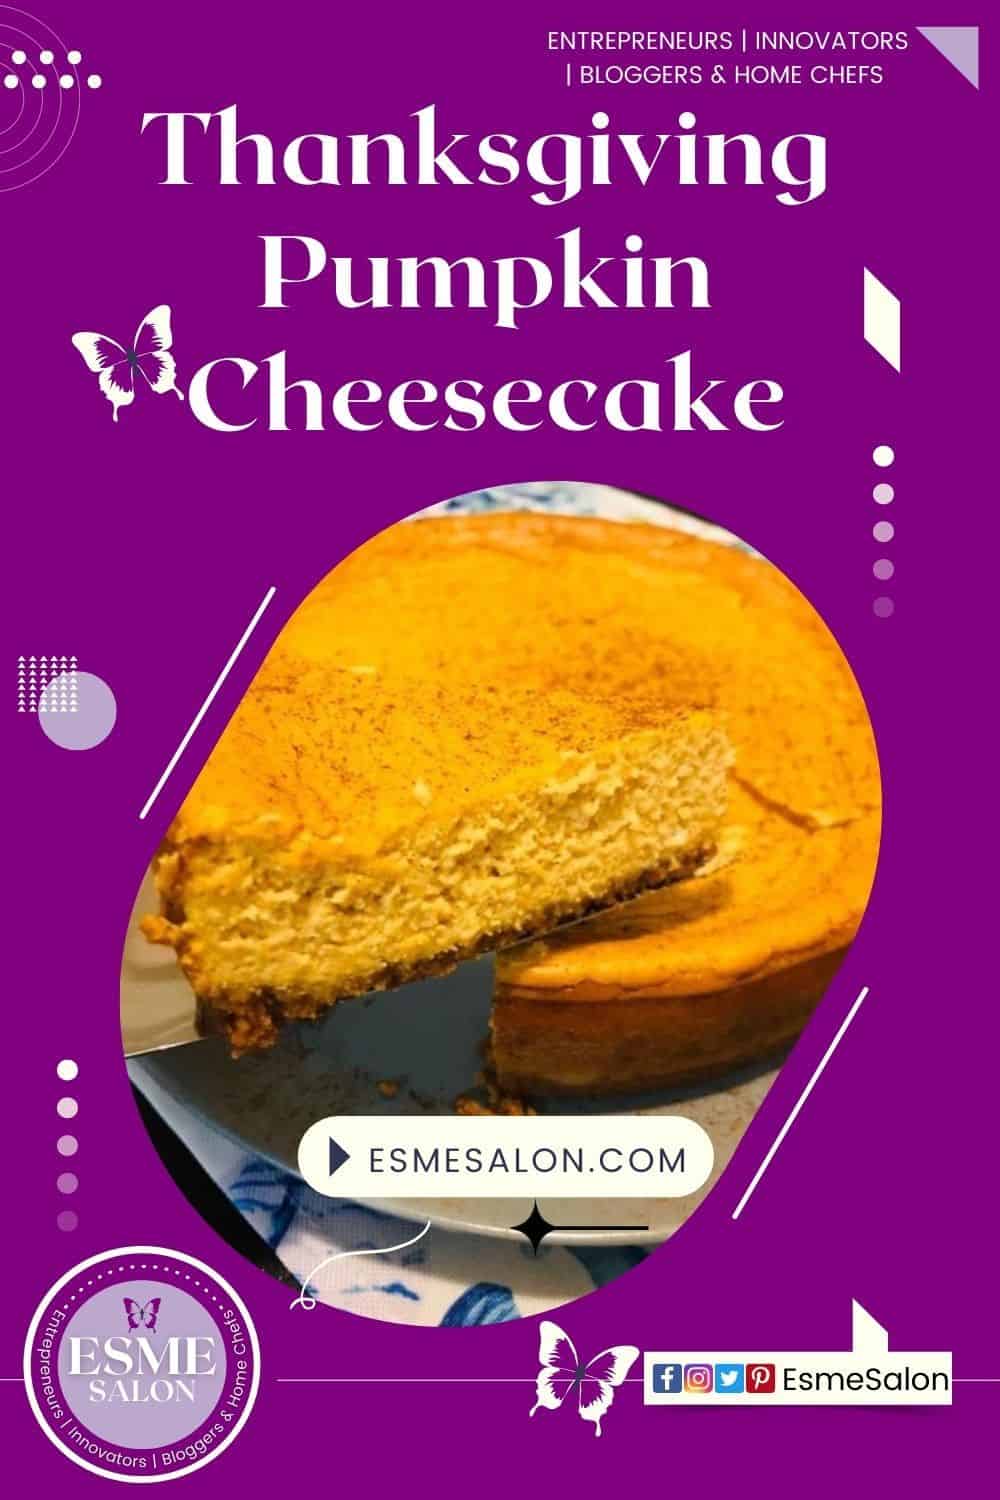 An image of a pumpkin cheesecake and one slice on a cake lifter